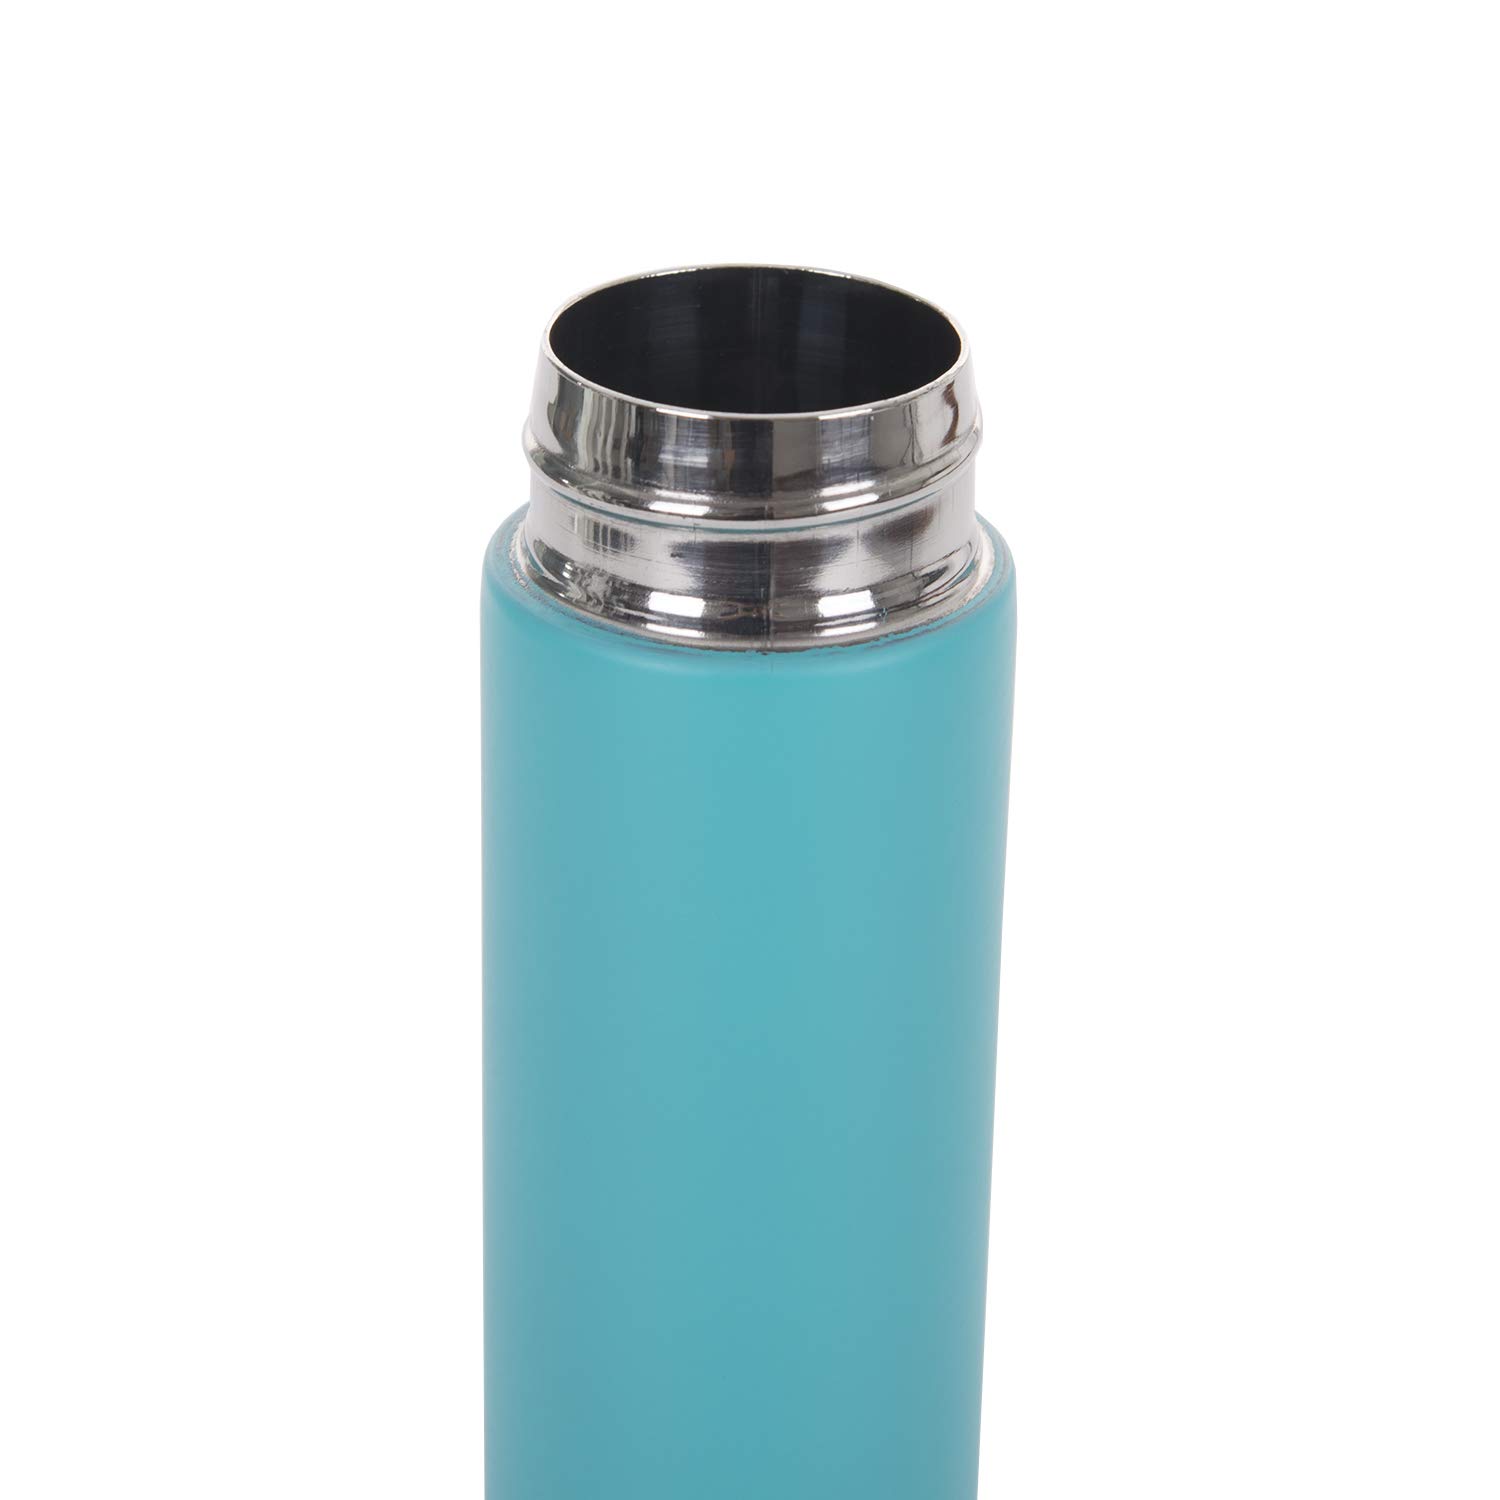 Funnuf Slim Stainless Steel Insulated Thermos Water Bottle 9.56 oz, Blue